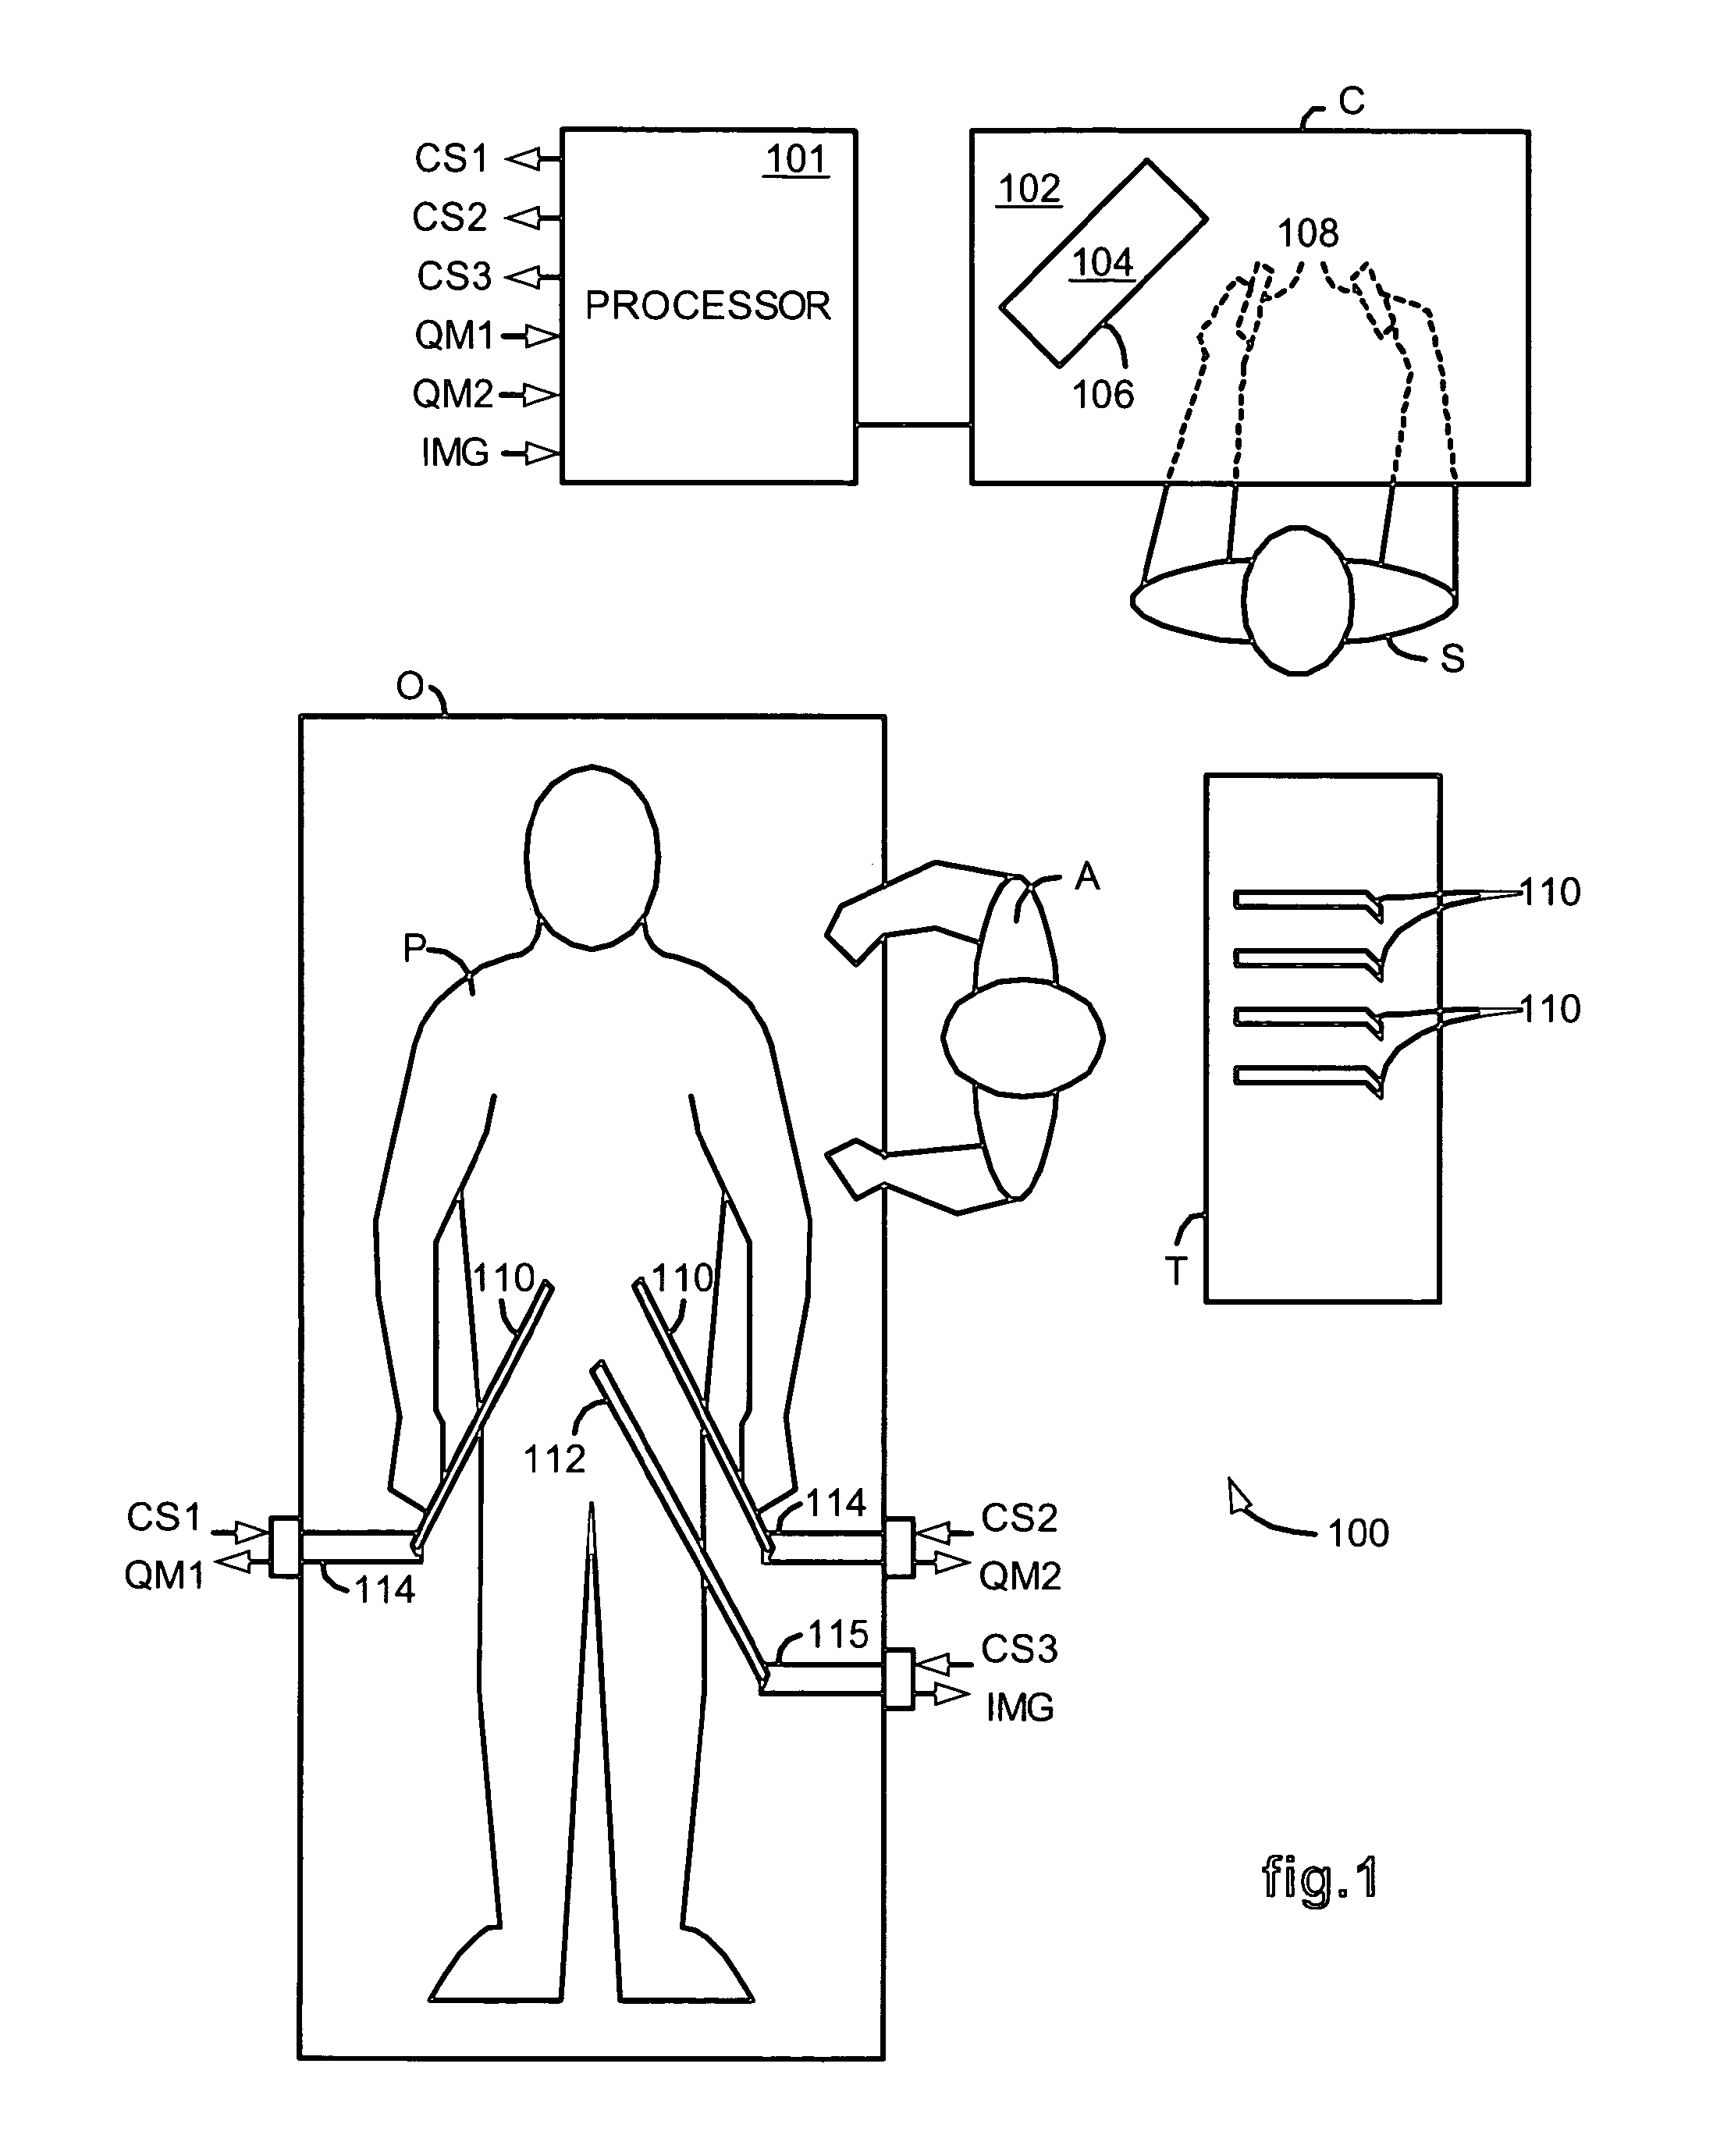 Real-Time Generation of Three-Dimensional Ultrasound image using a Two-Dimensional Ultrasound Transducer in a Robotic System